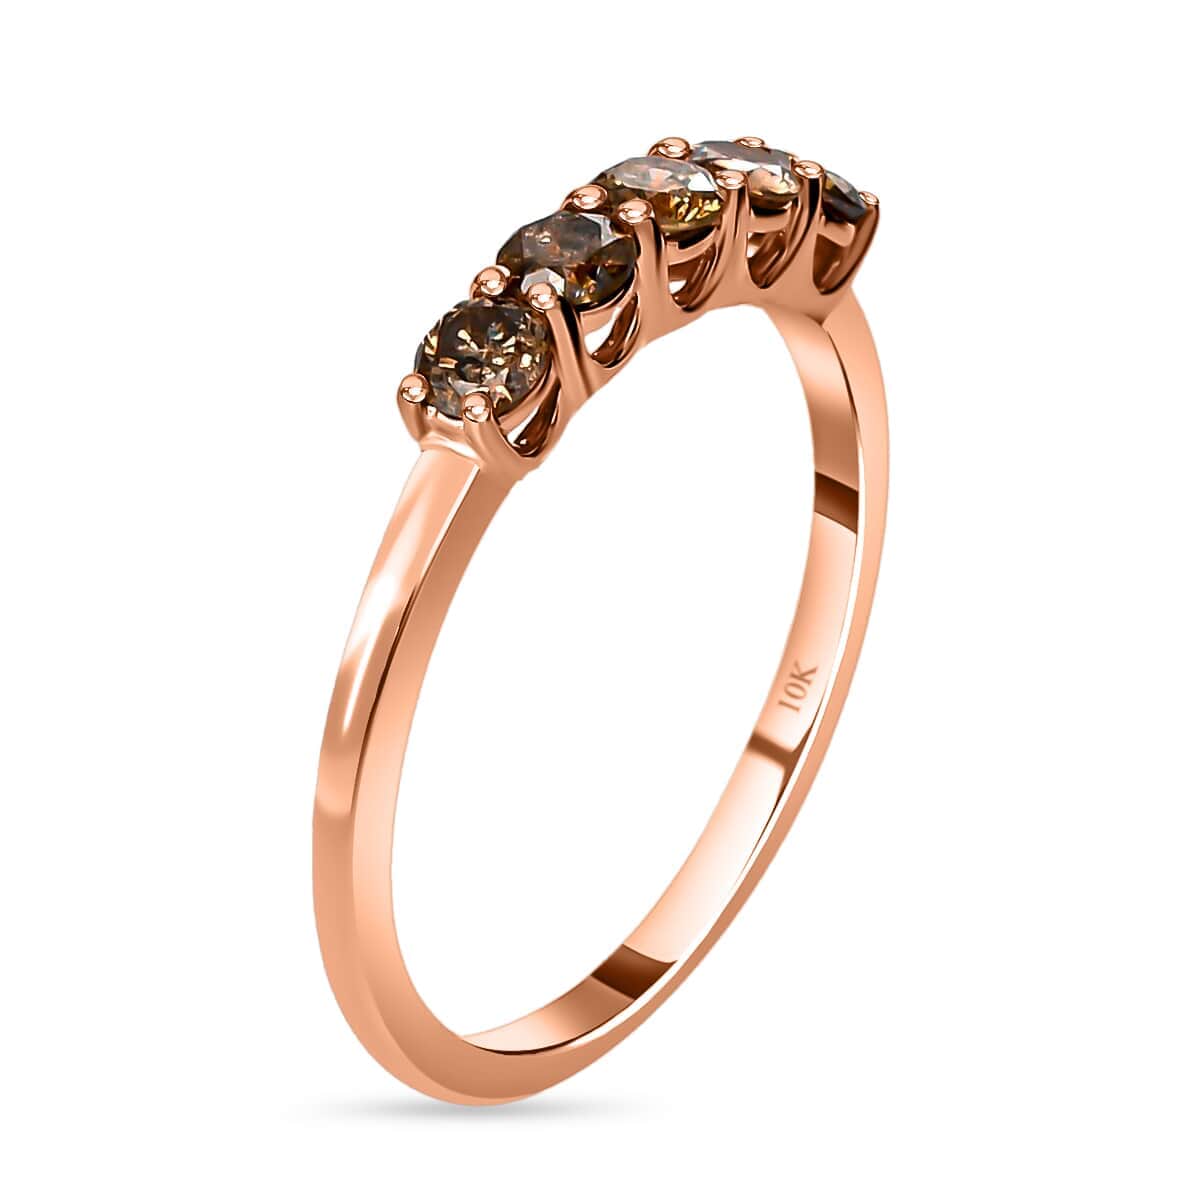 Luxoro  I3 Natural Champagne Diamond Ring, 10K Rose Gold Ring, Diamond 5 Stone Ring, Diamond Jewelry For Her, Gold Gifts 0.50 ctw image number 3